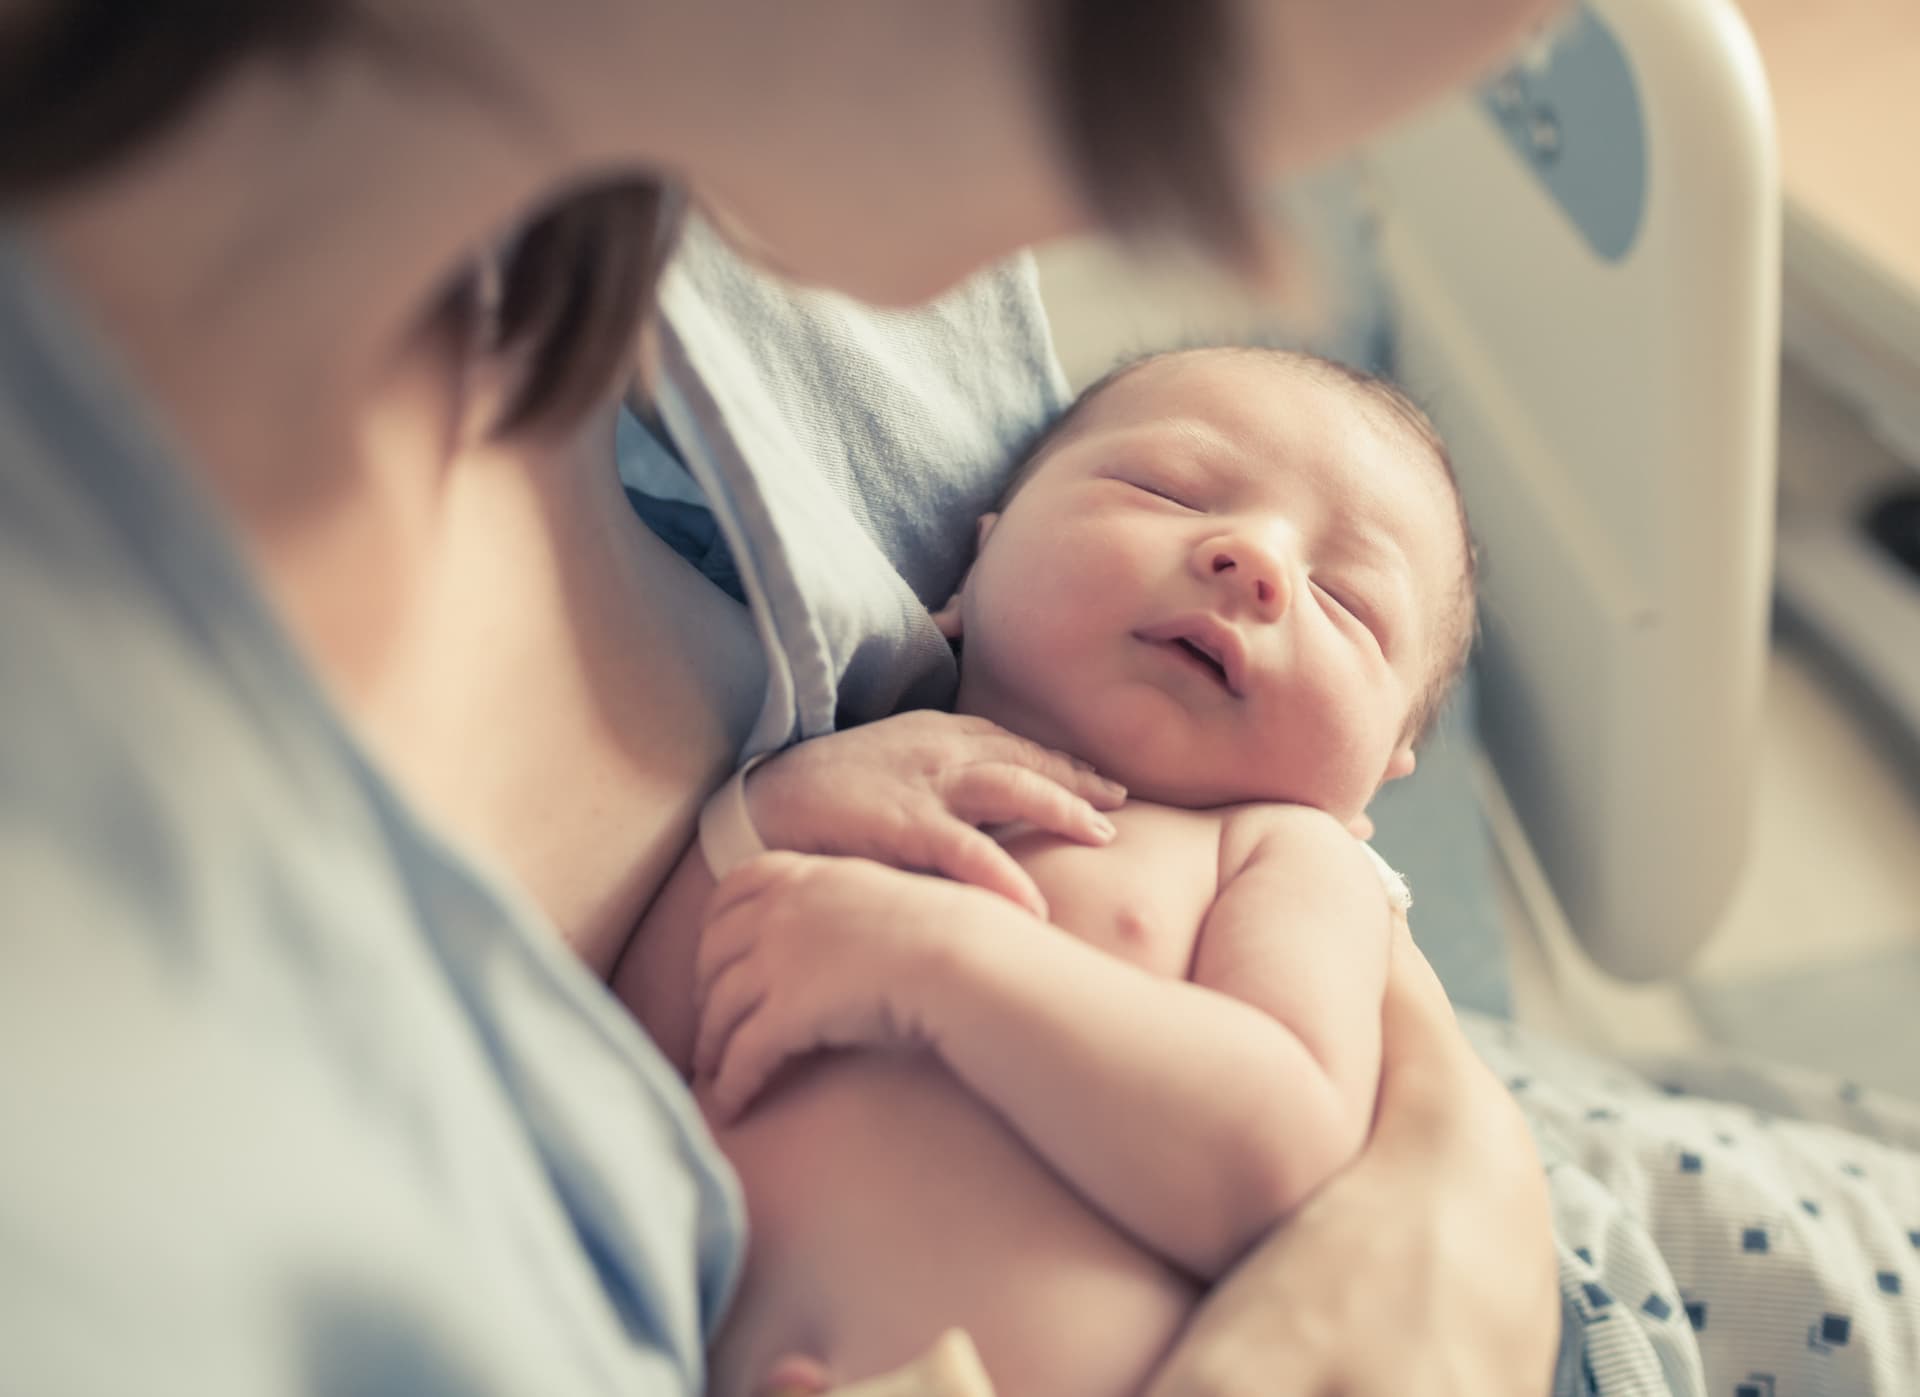 Caesarean section recovery: Tips and Advice - Whole Body Health & Wellness